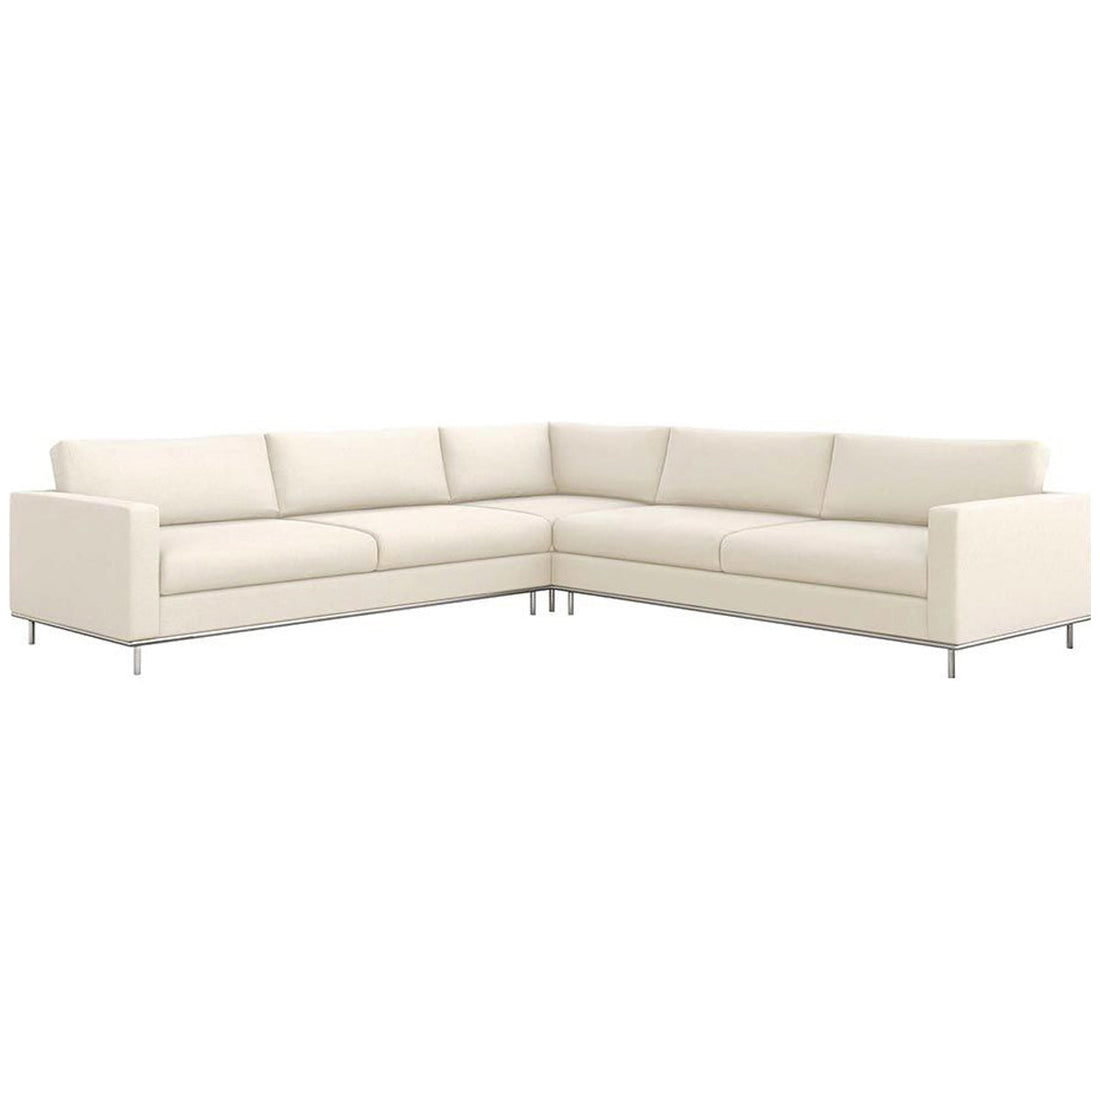 Interlude Home Valencia 3-Piece Sectional - Pure